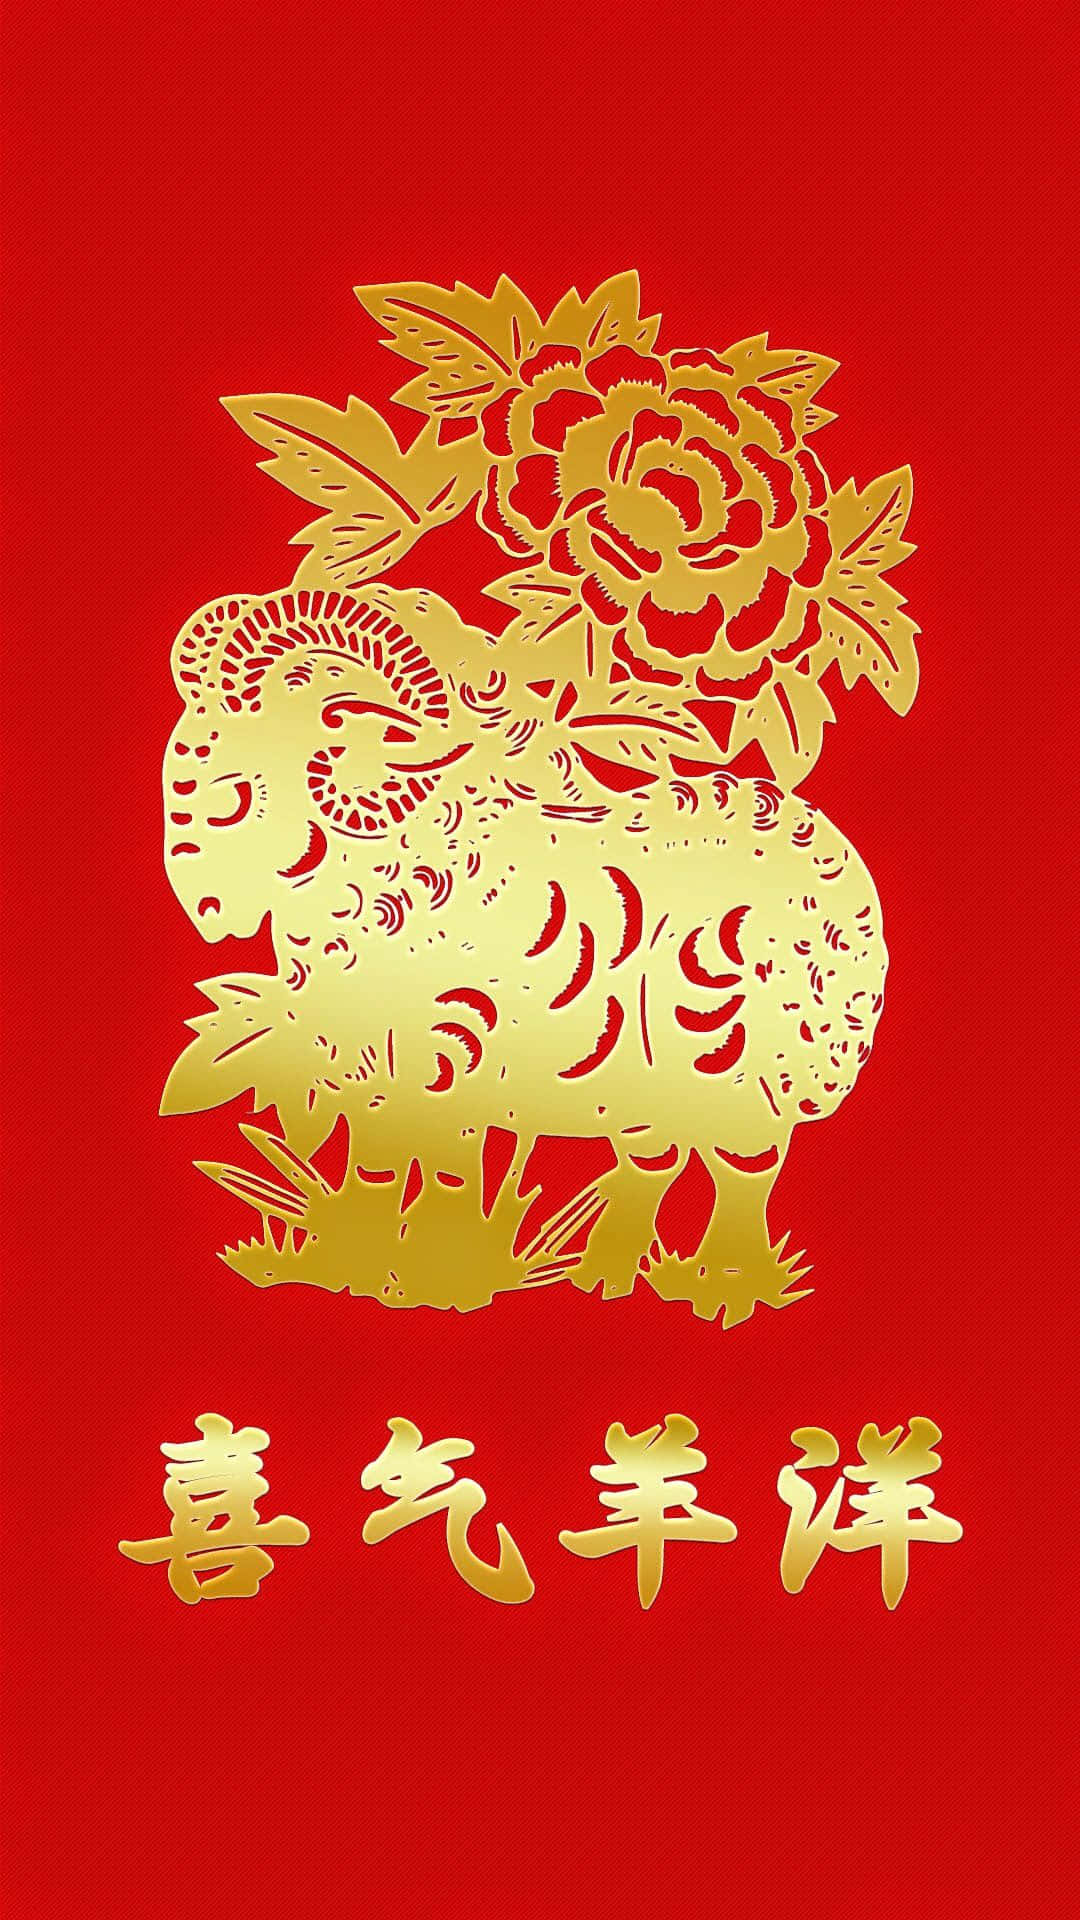 Spread Joy and Blessings This Chinese New Year With An Iphone Wallpaper